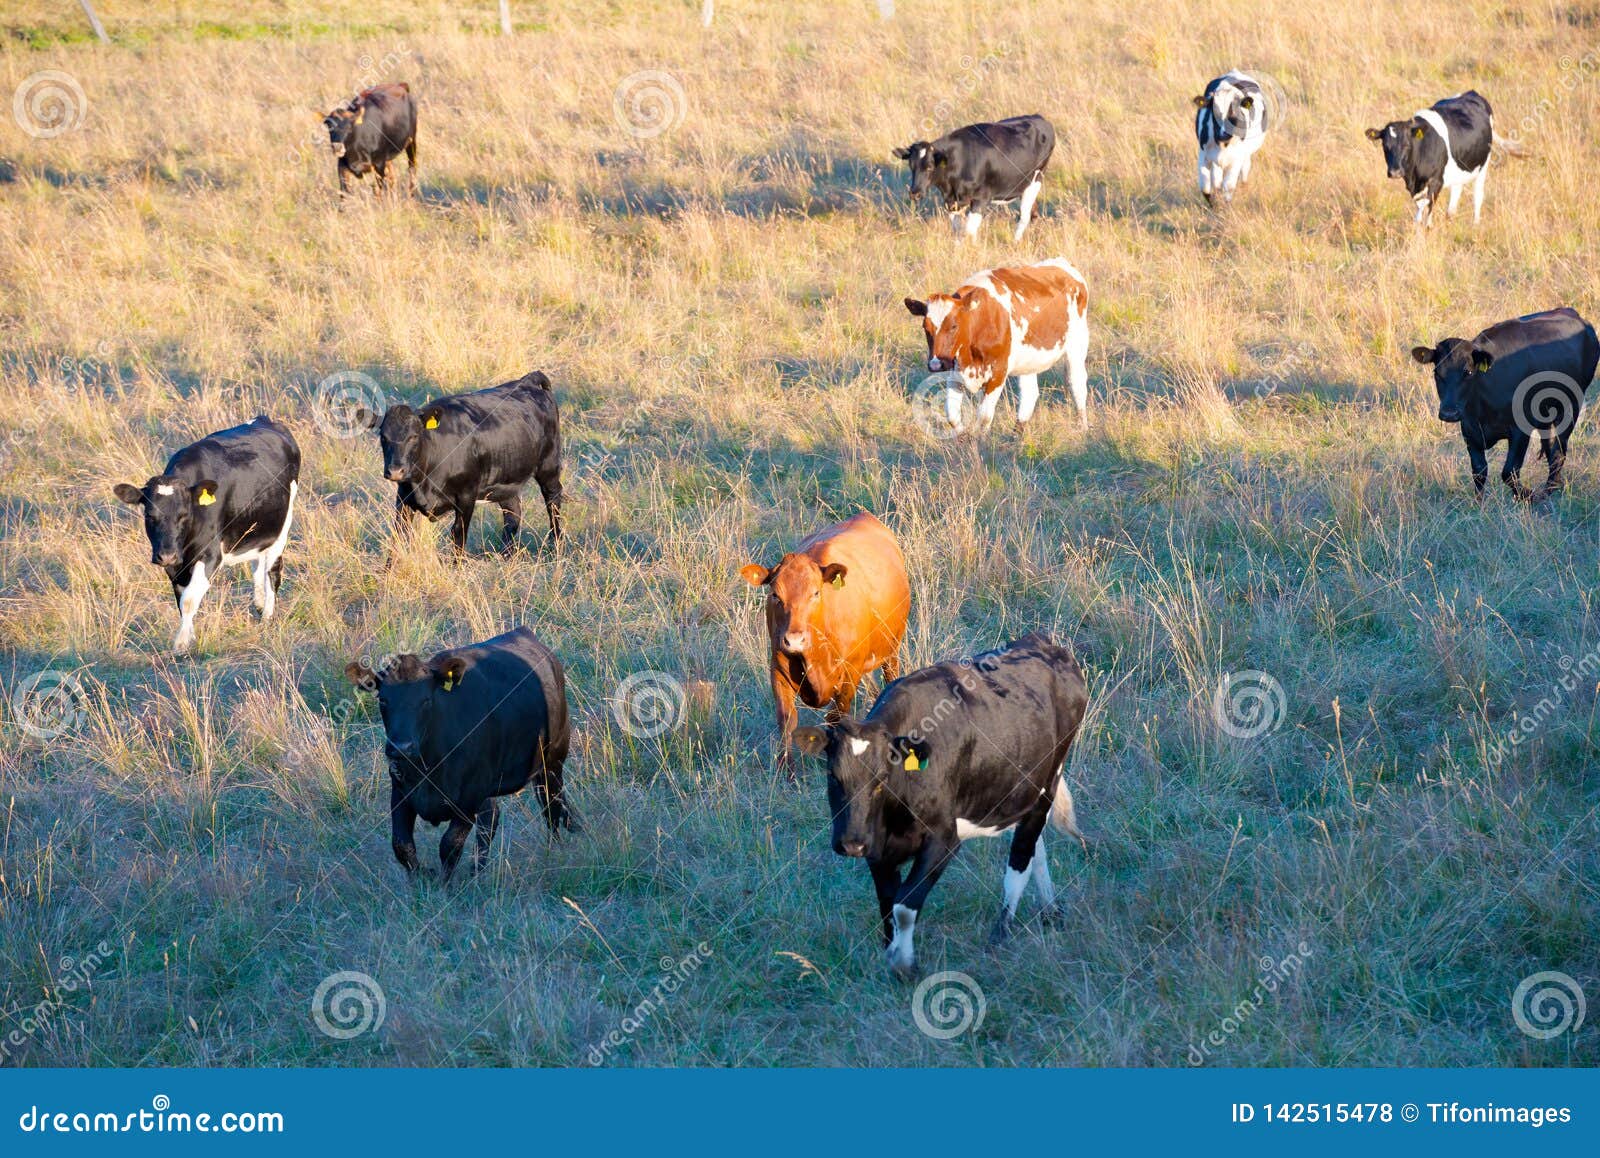 cattle in southern chile